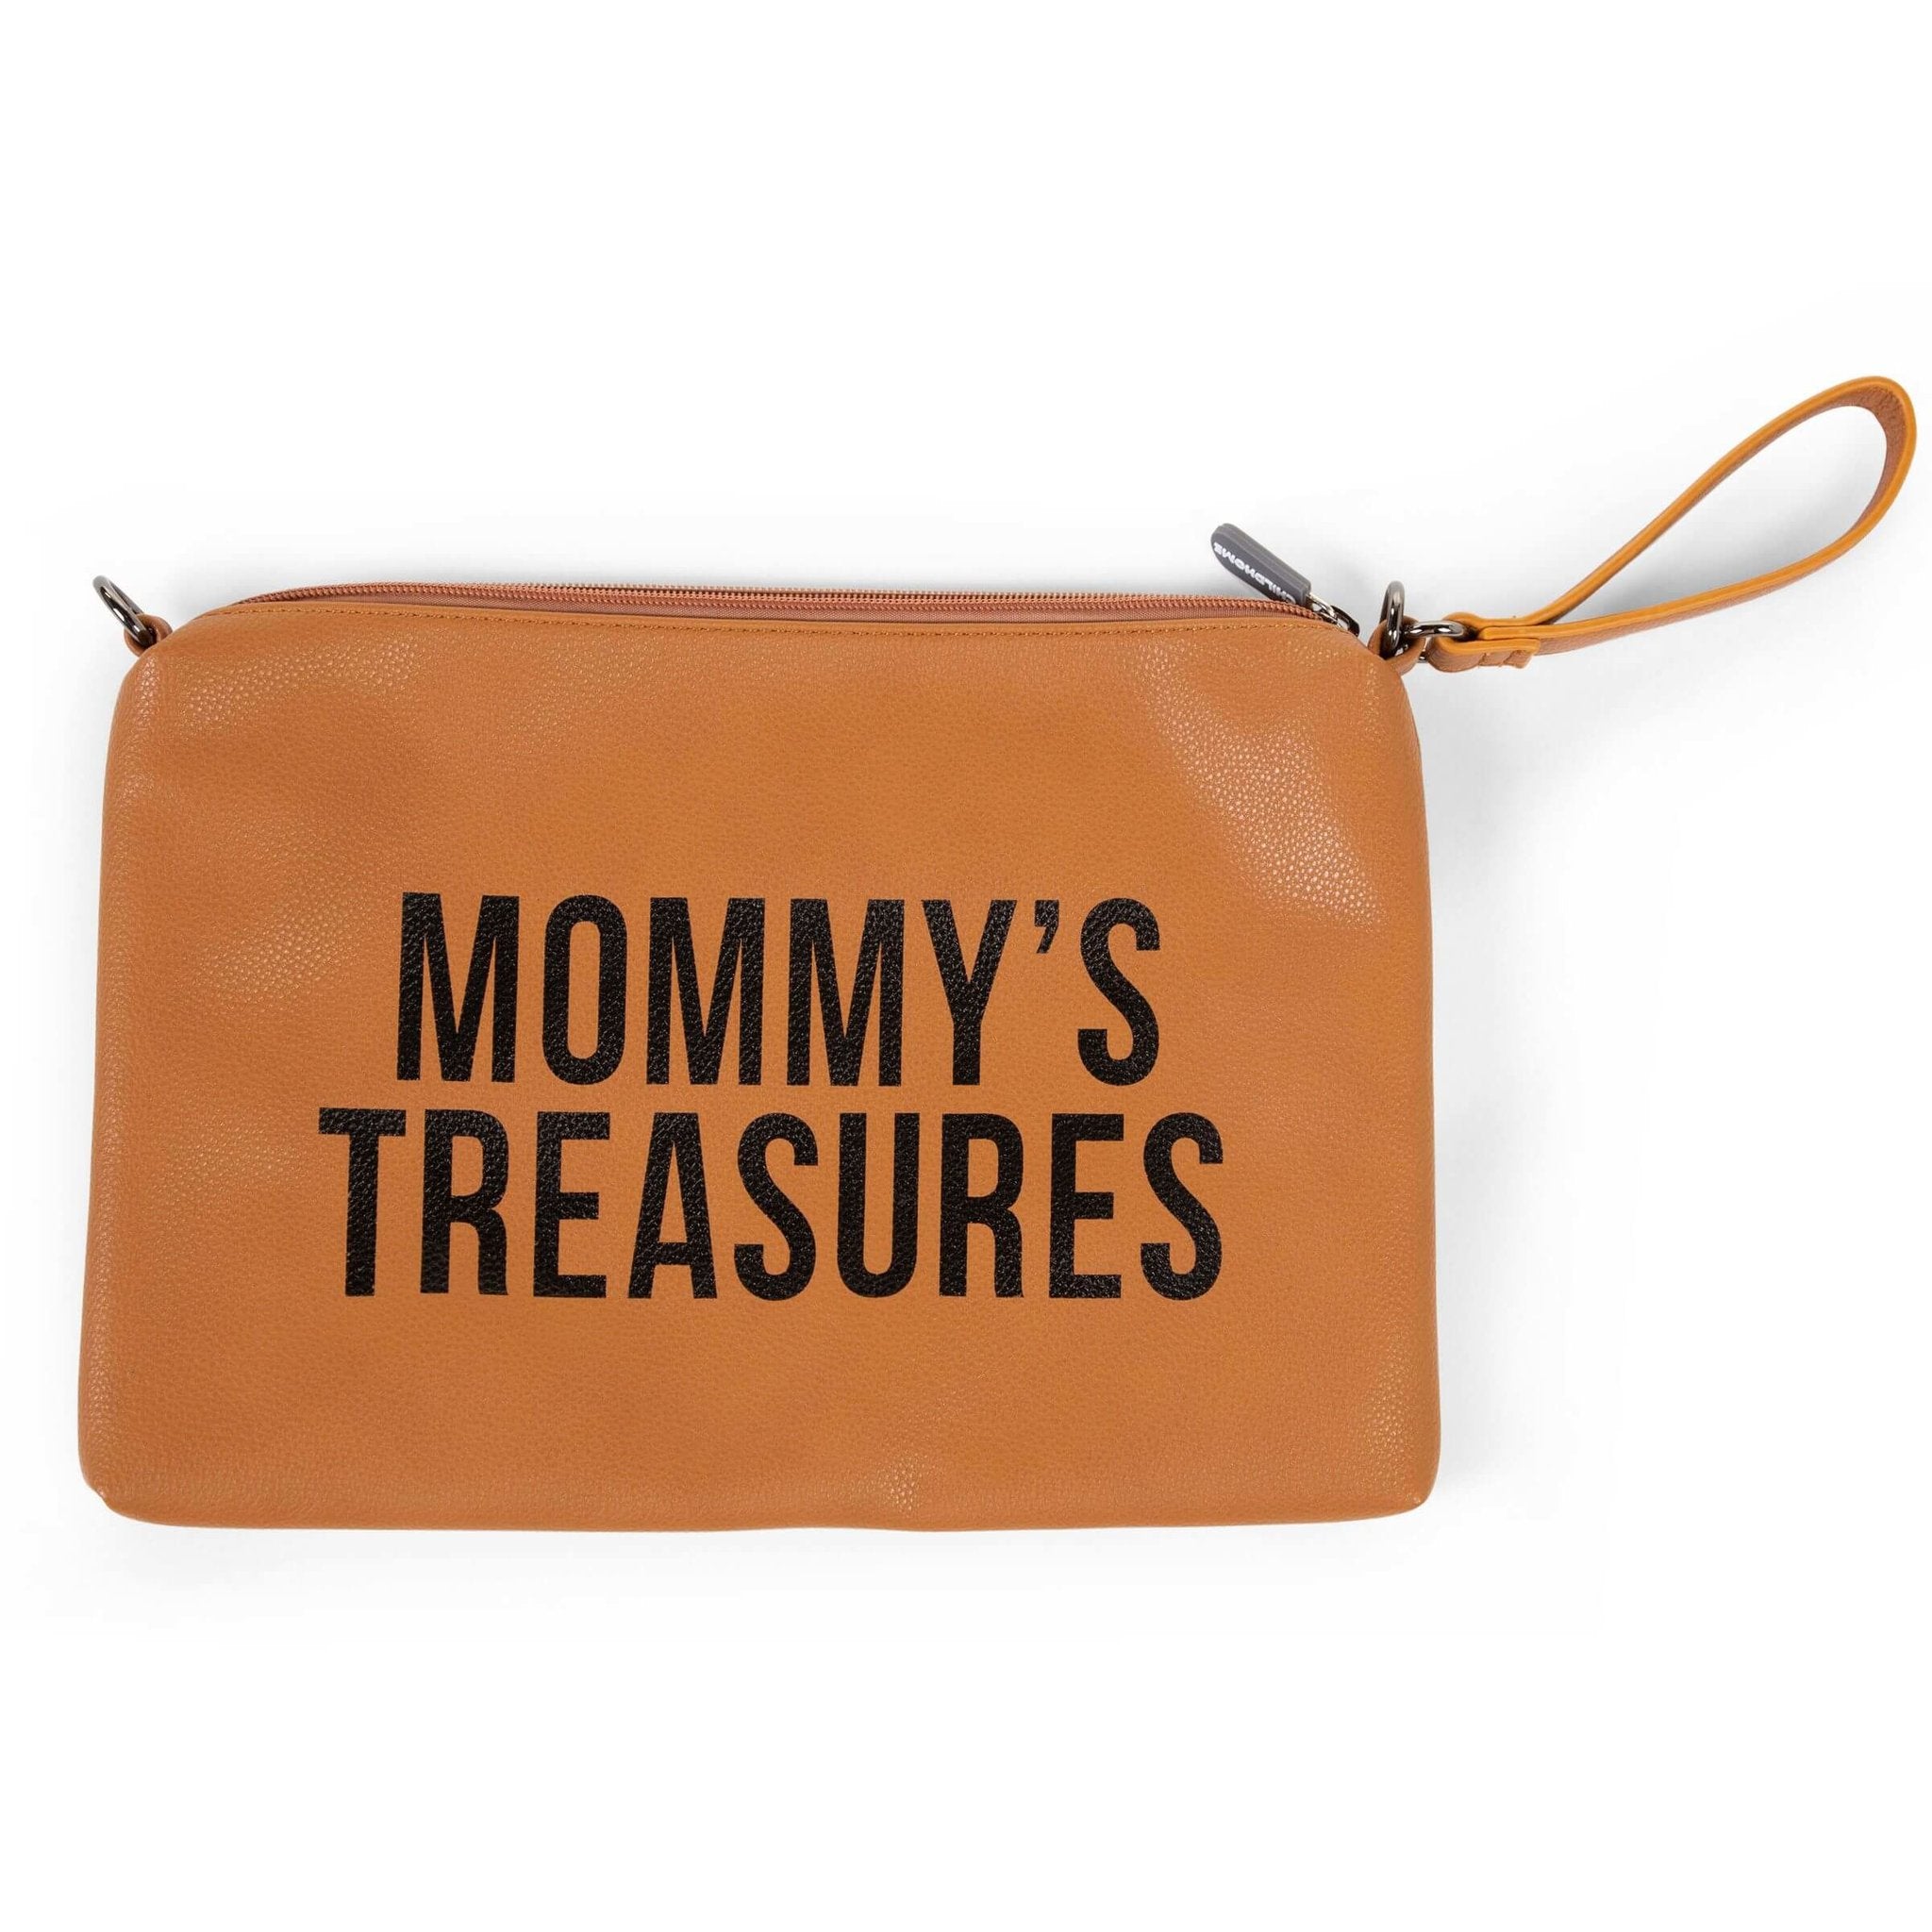 ChildHome Mommy's Treasures Clutch - Leatherlook